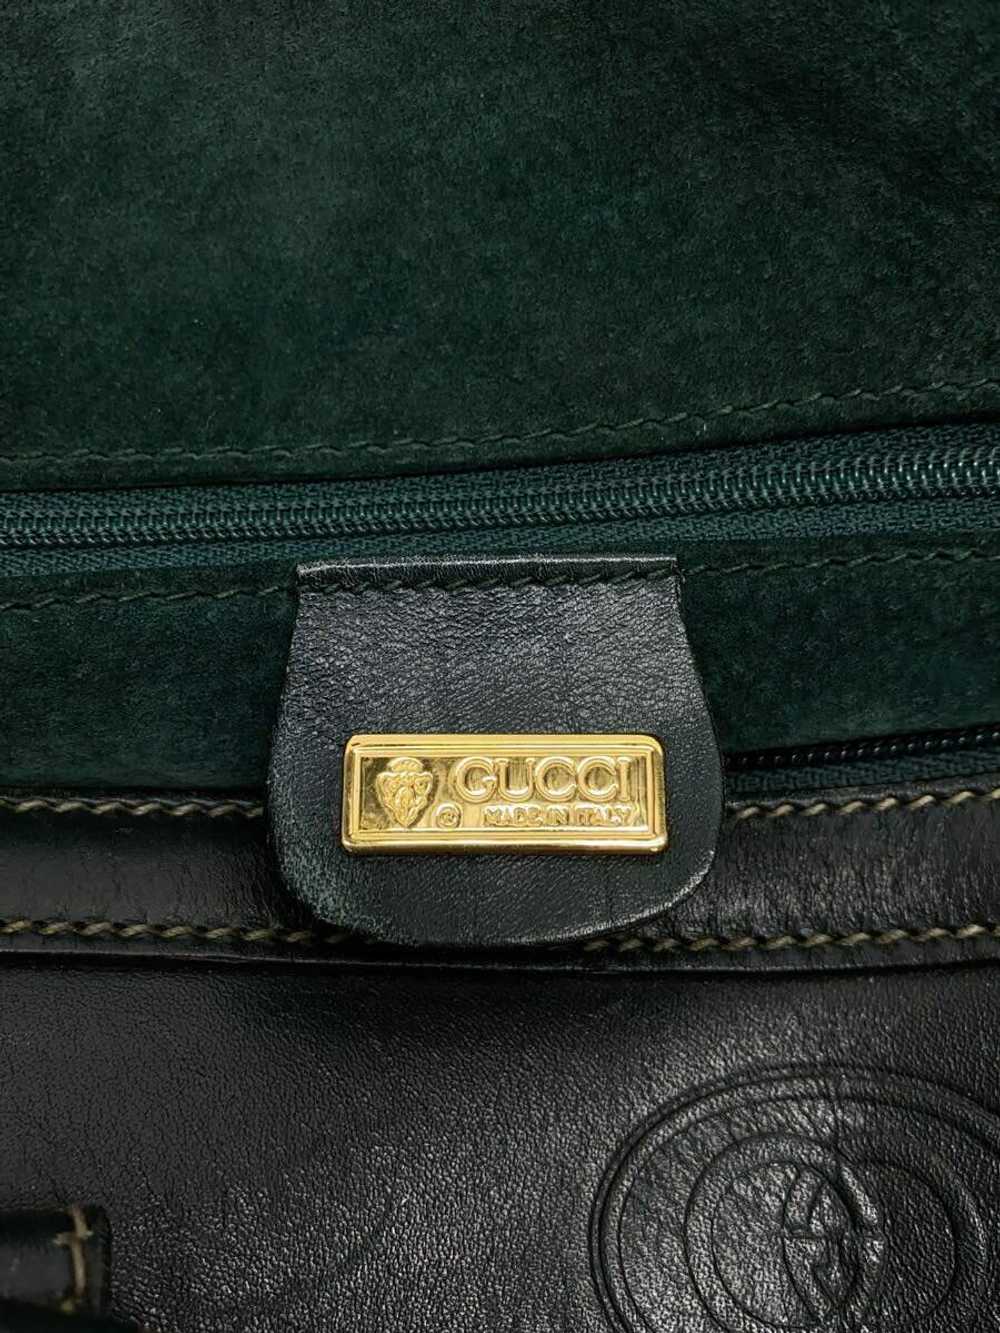 Used Gucci Boston Bag/Suede/Grn Bag - image 5